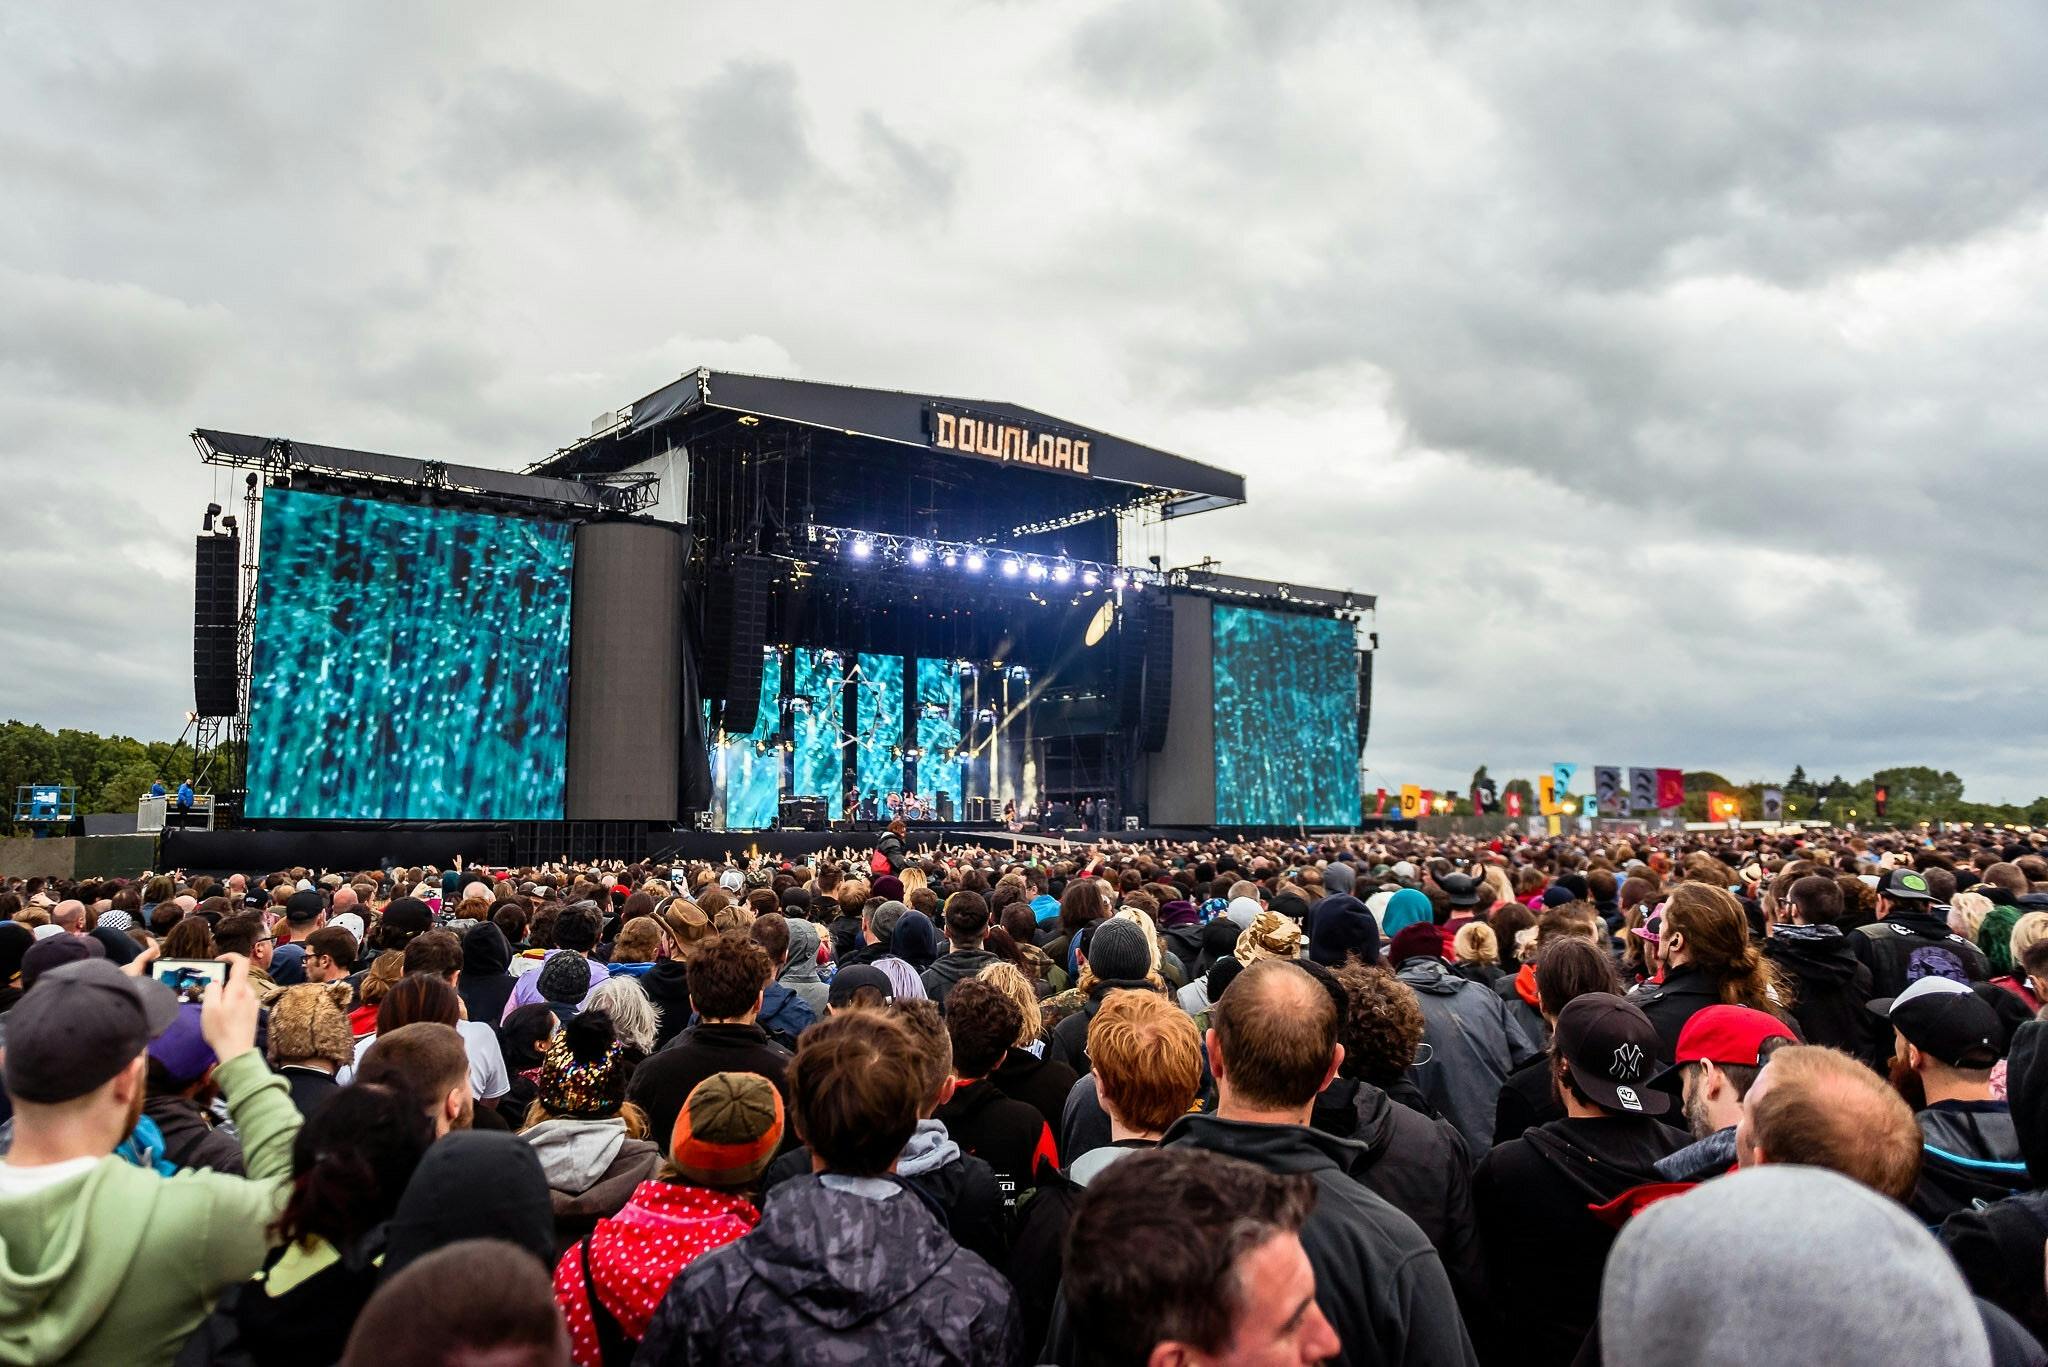 Why Losing Download Festival Hurts More Than Most